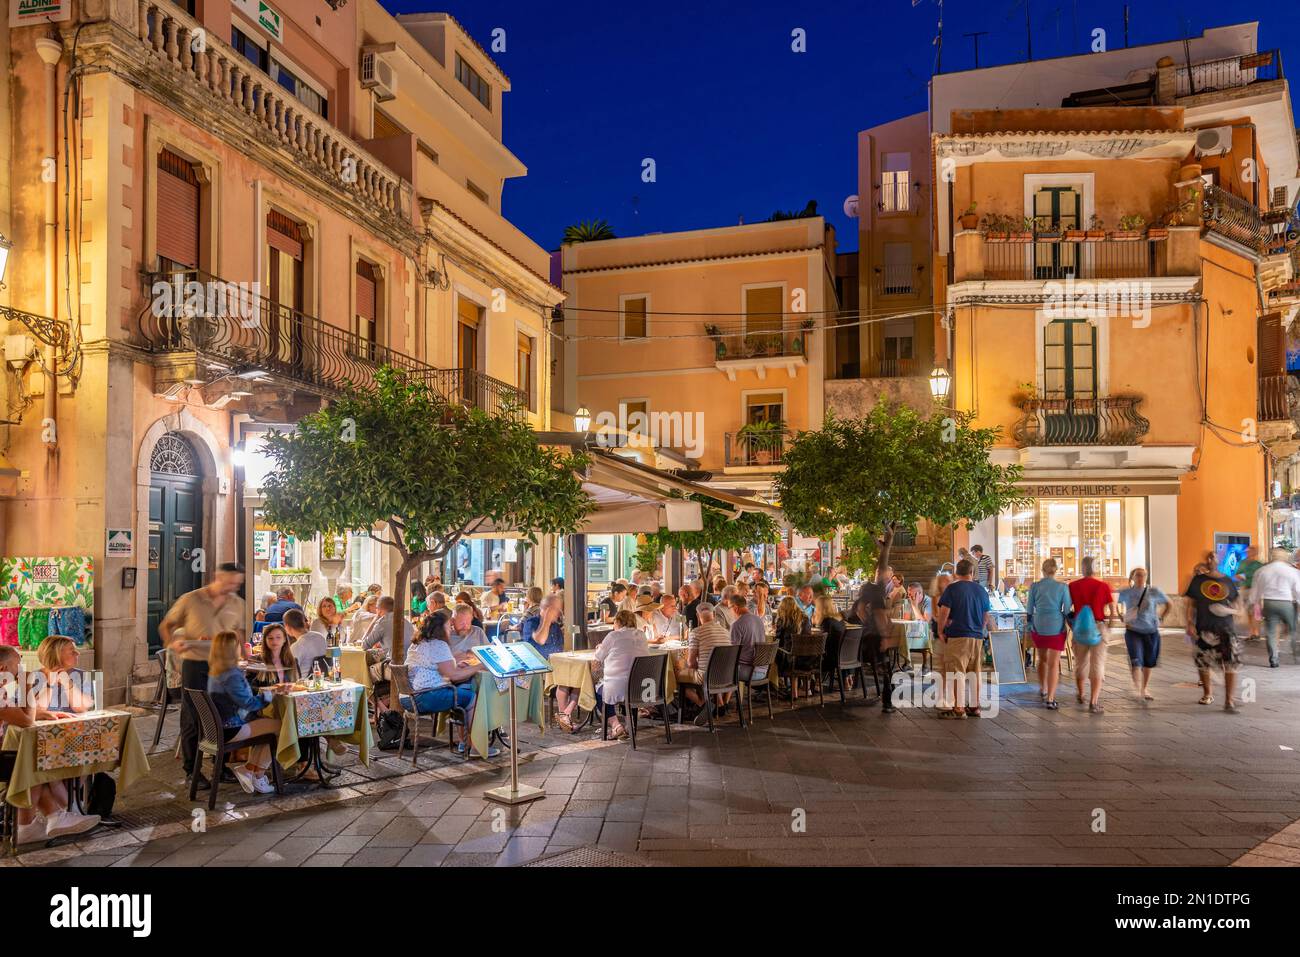 View of cafes and restaurants on busy street in Taormina at dusk, Taormina, Sicily, Italy, Mediterranean, Europe Stock Photo